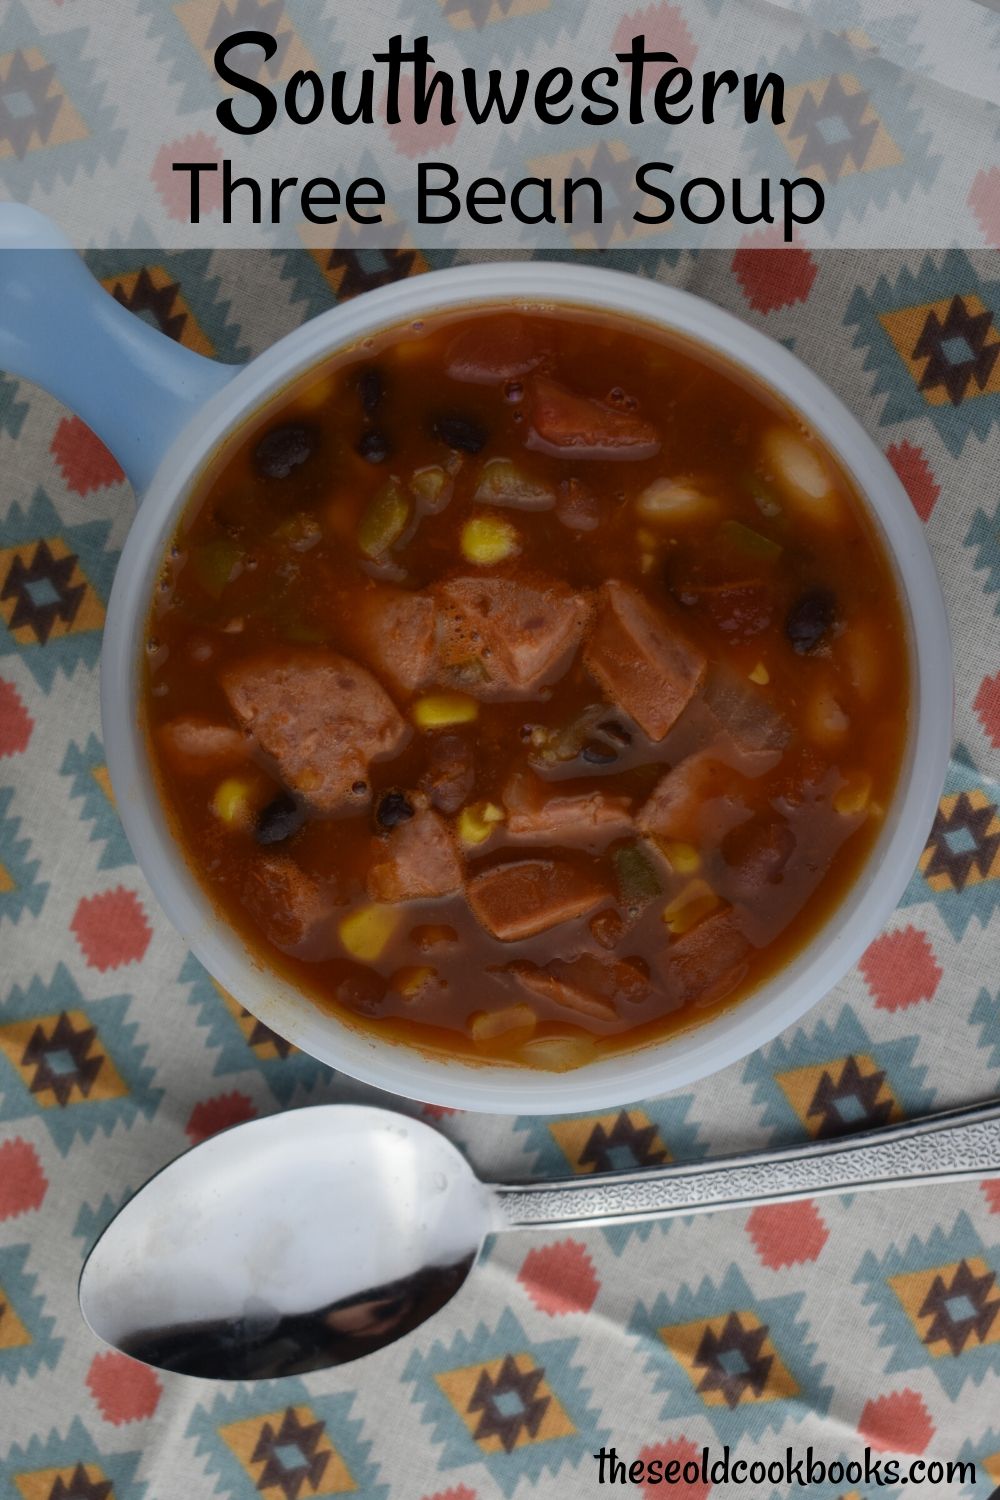 Southwestern Three Bean Soup is a hearty soup with simple ingredients.  The southwest flavors complement a combination of chili beans, black beans and white kidney beans.  Make a huge pot of this and eat on it for the whole week. 